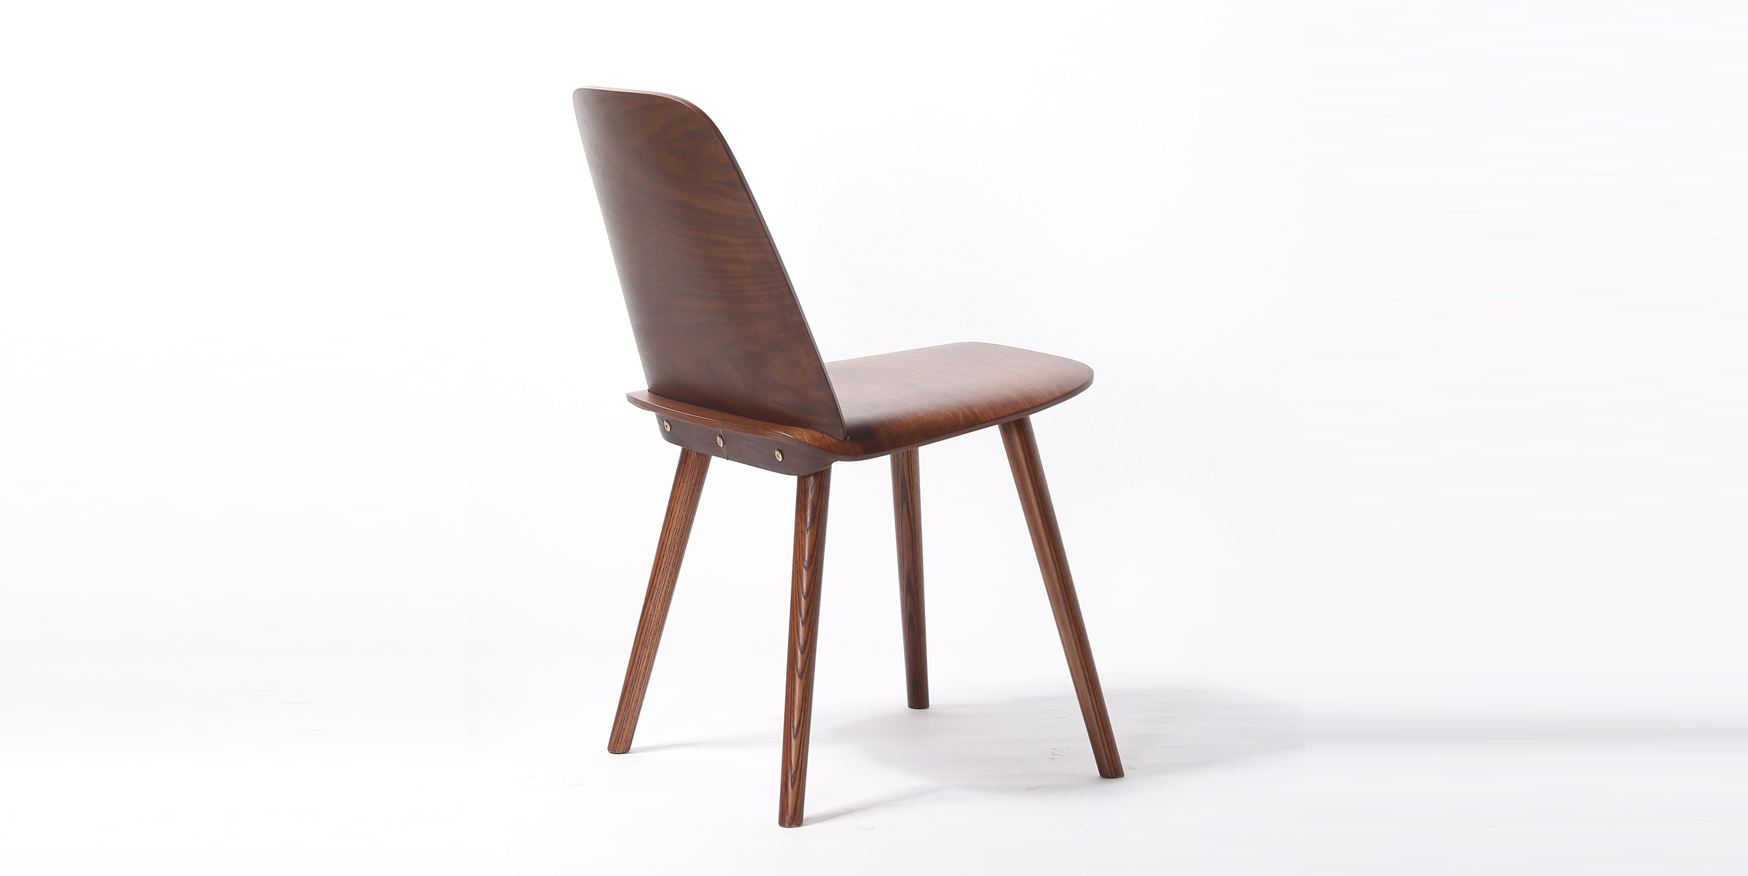 bent wood dining chair
